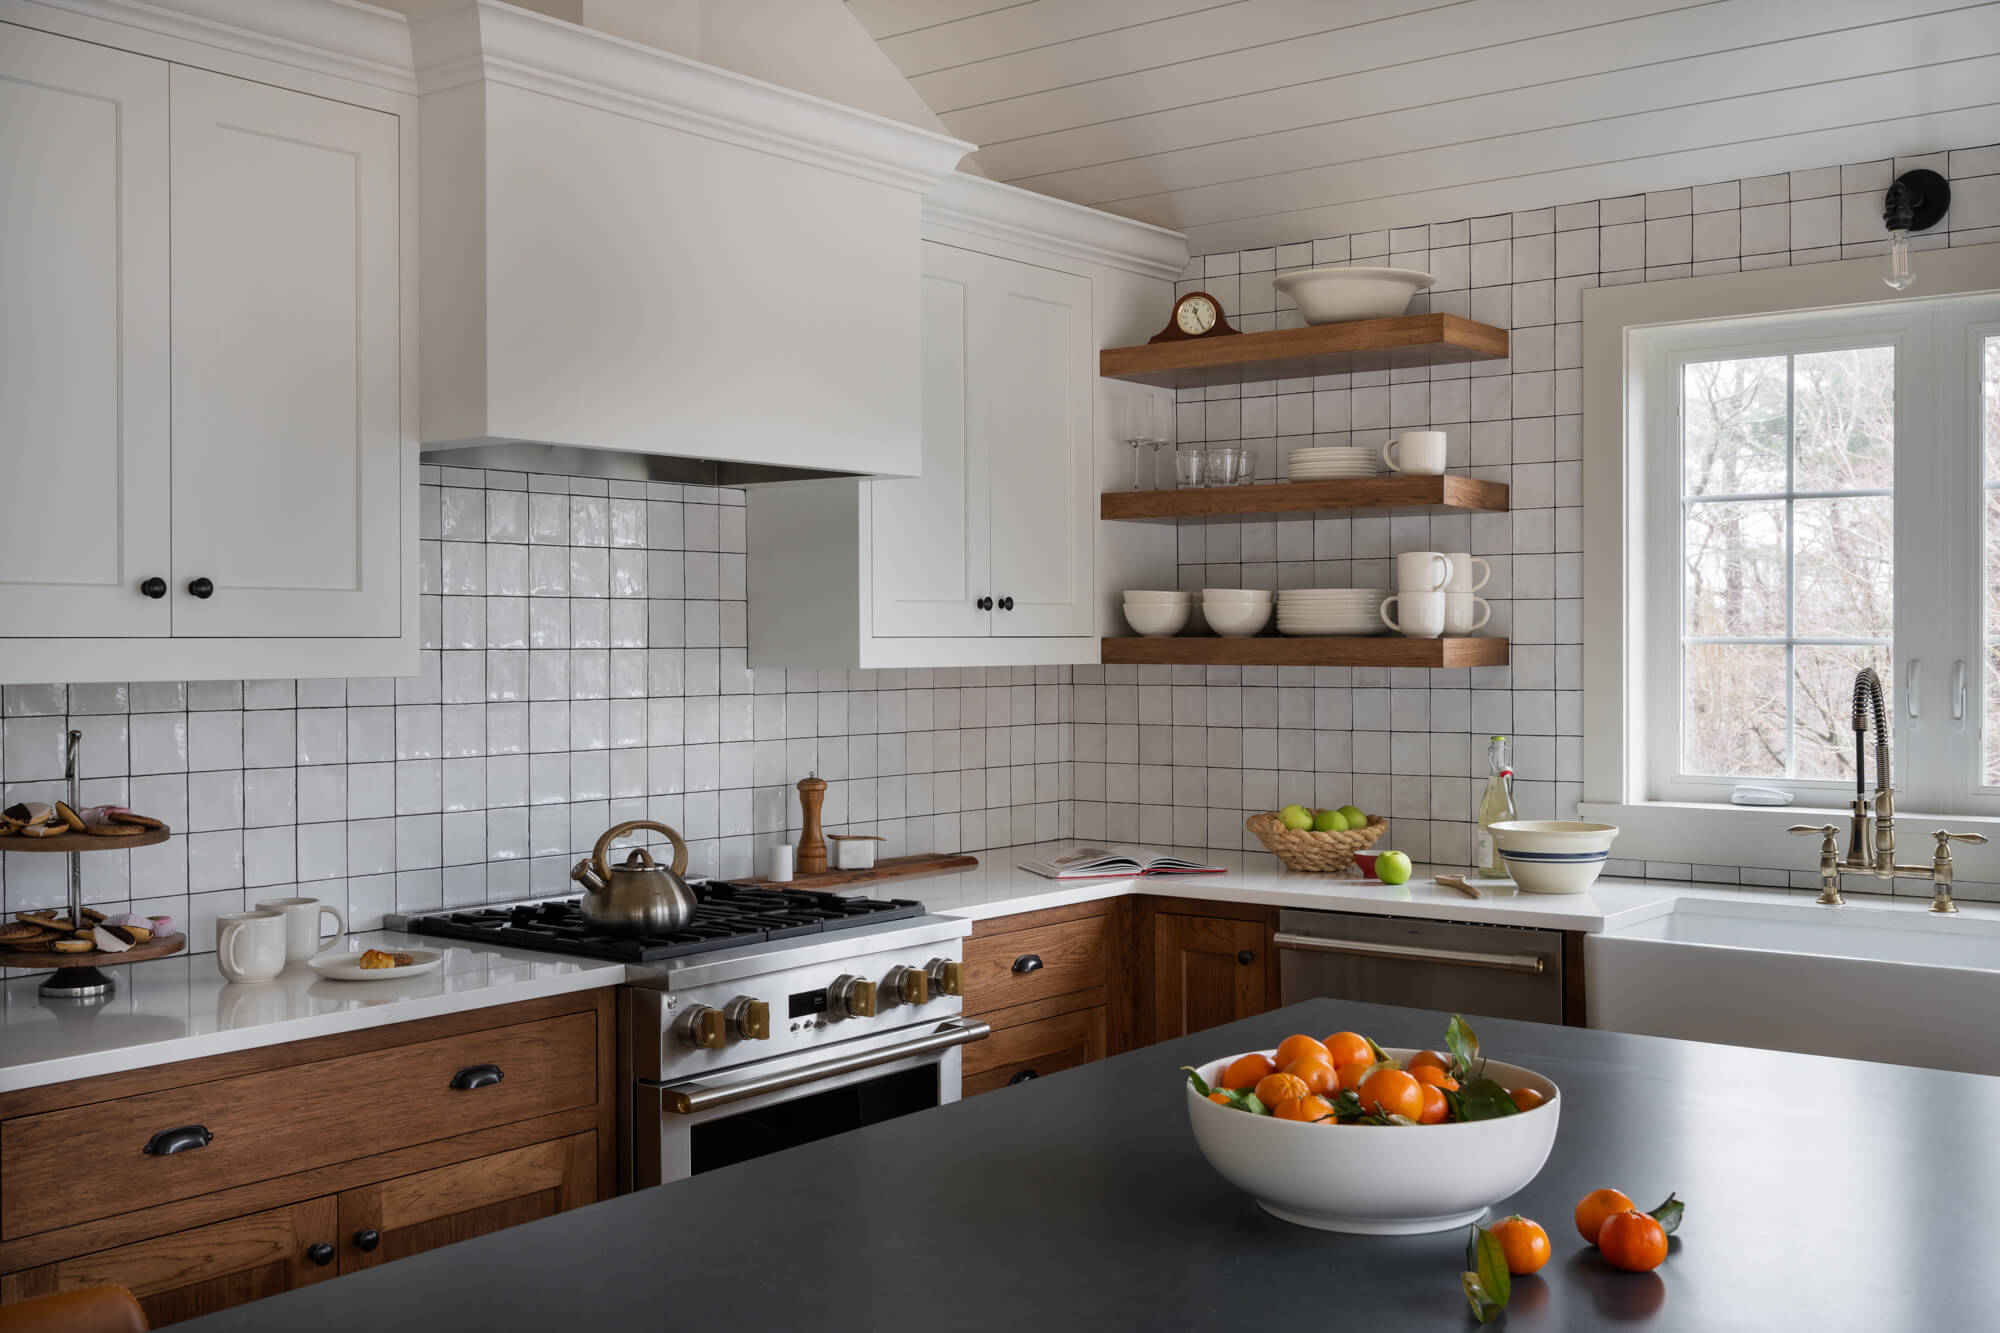 Silestone charcoal soapstone island countertop, white upper cabinetry, natural wood lower cabinetry